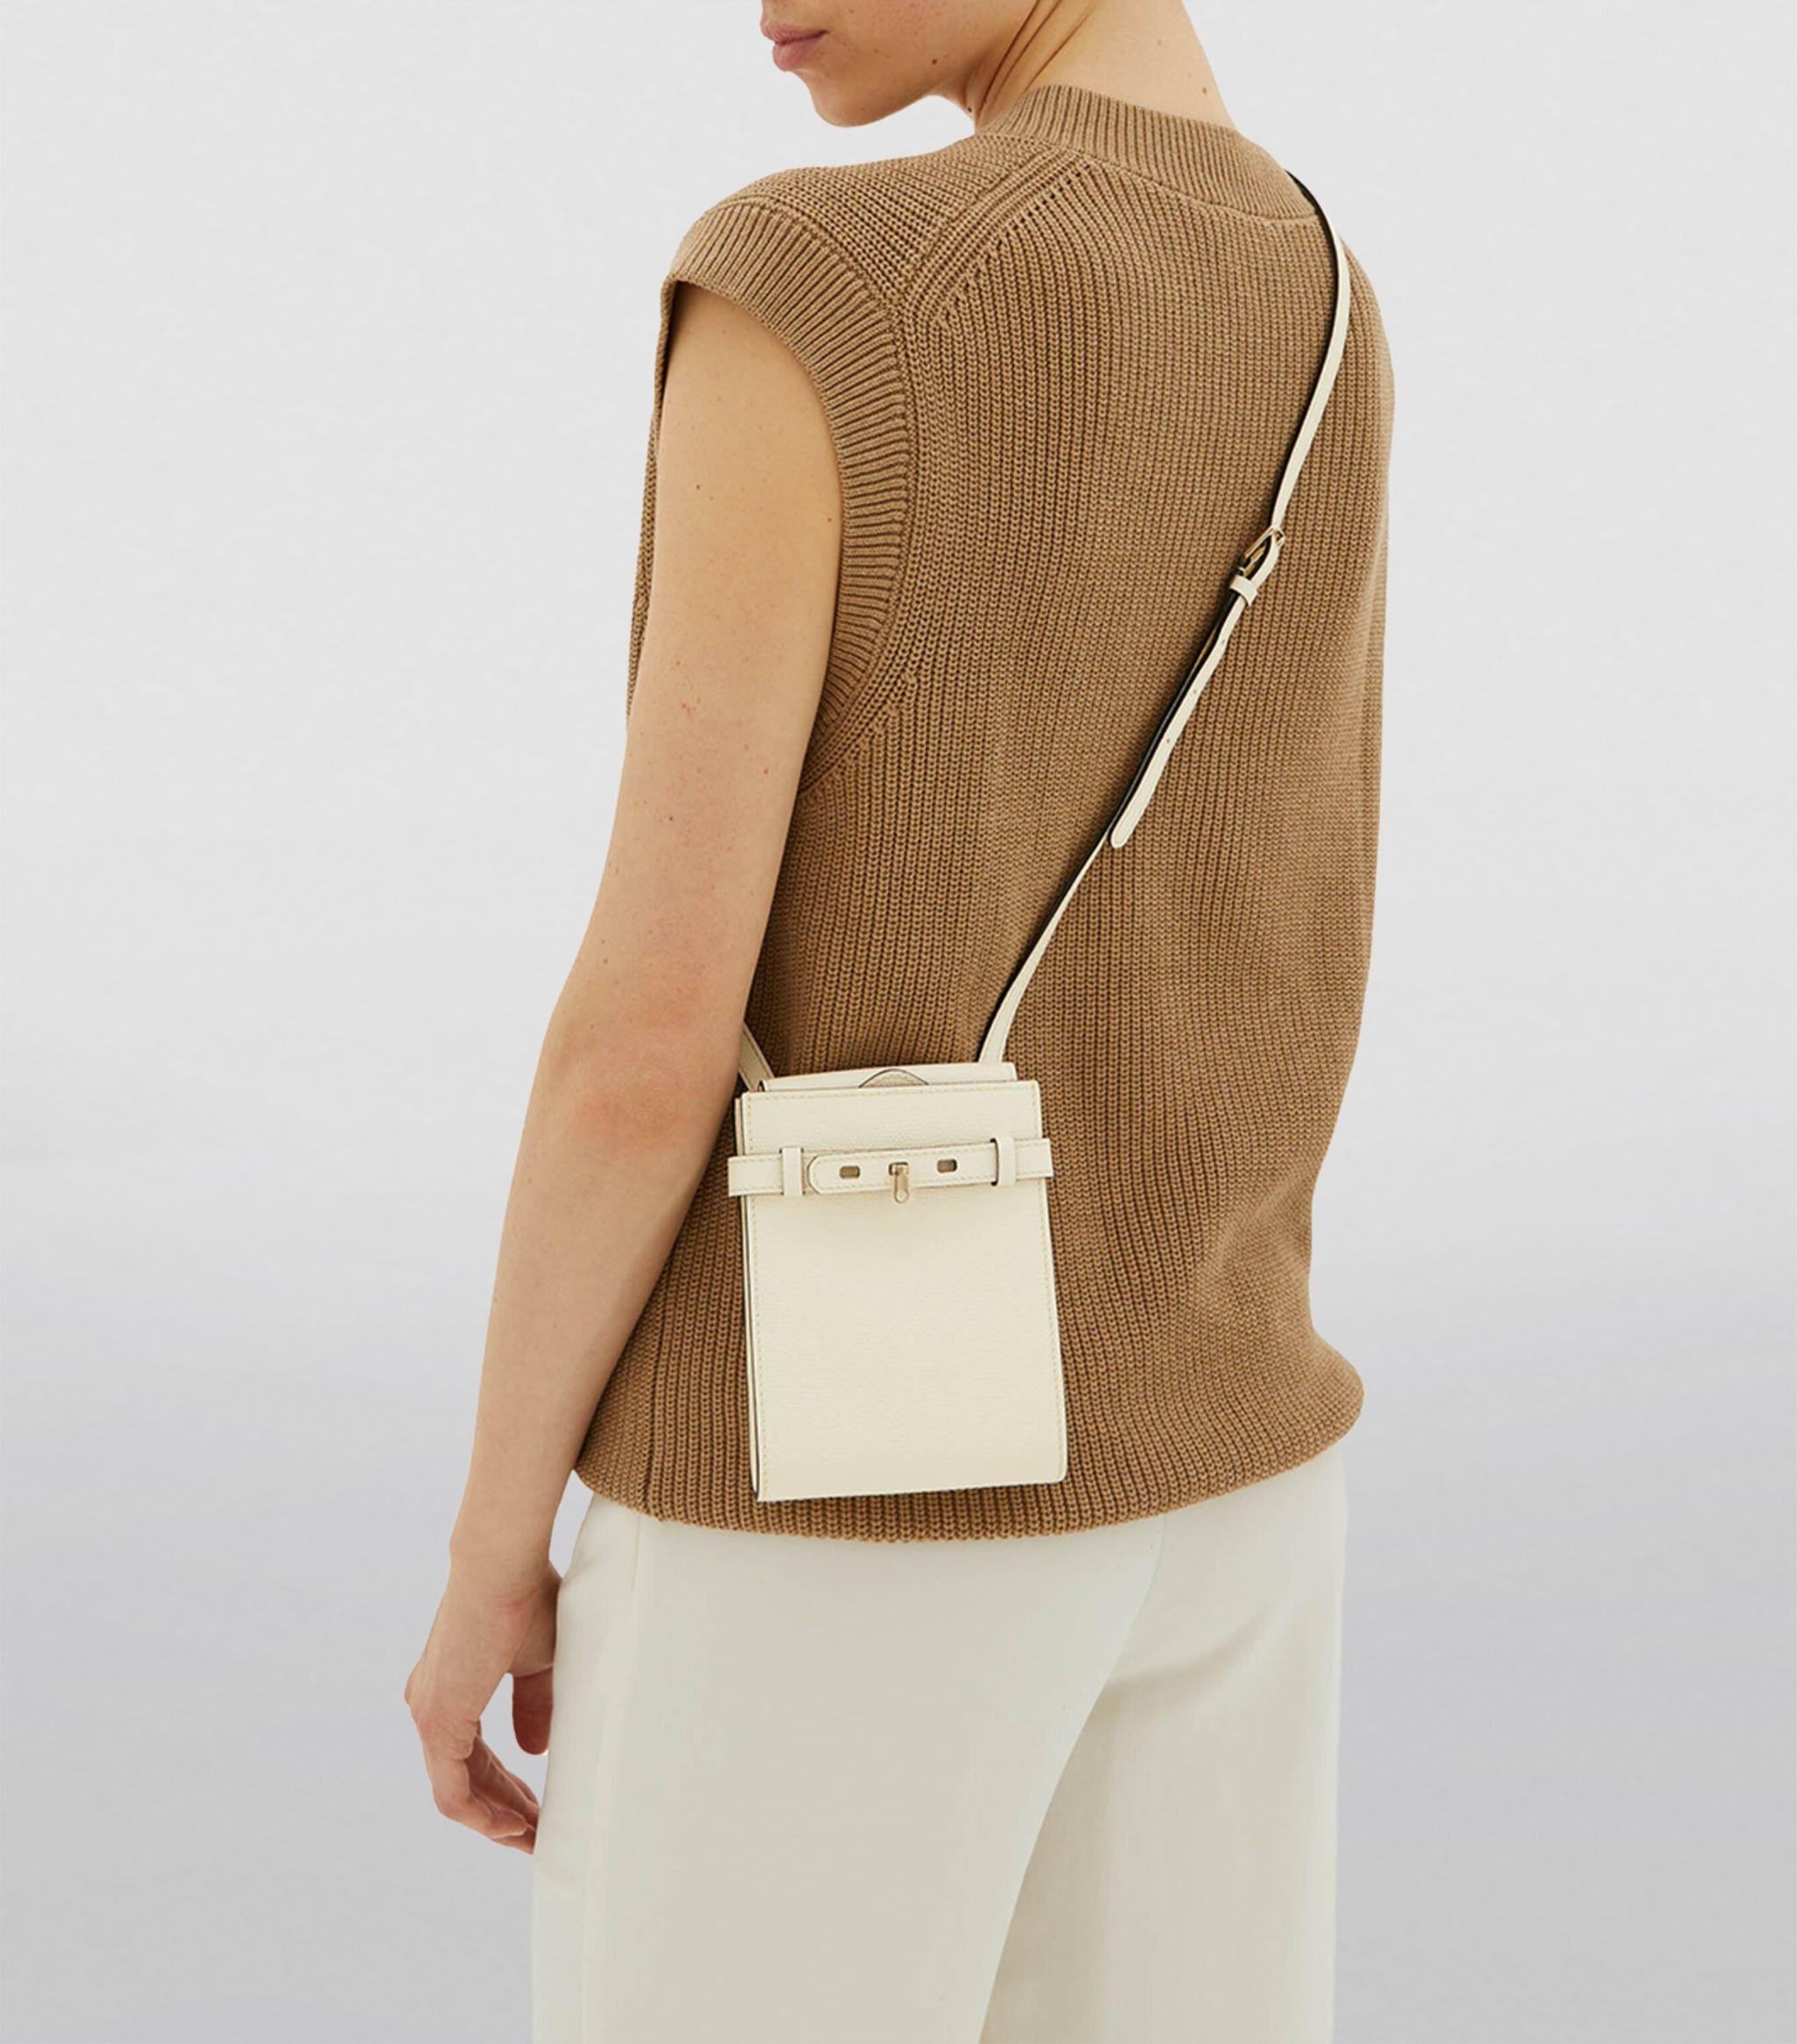 Valextra brown Leather Soft Cross-Body Bag